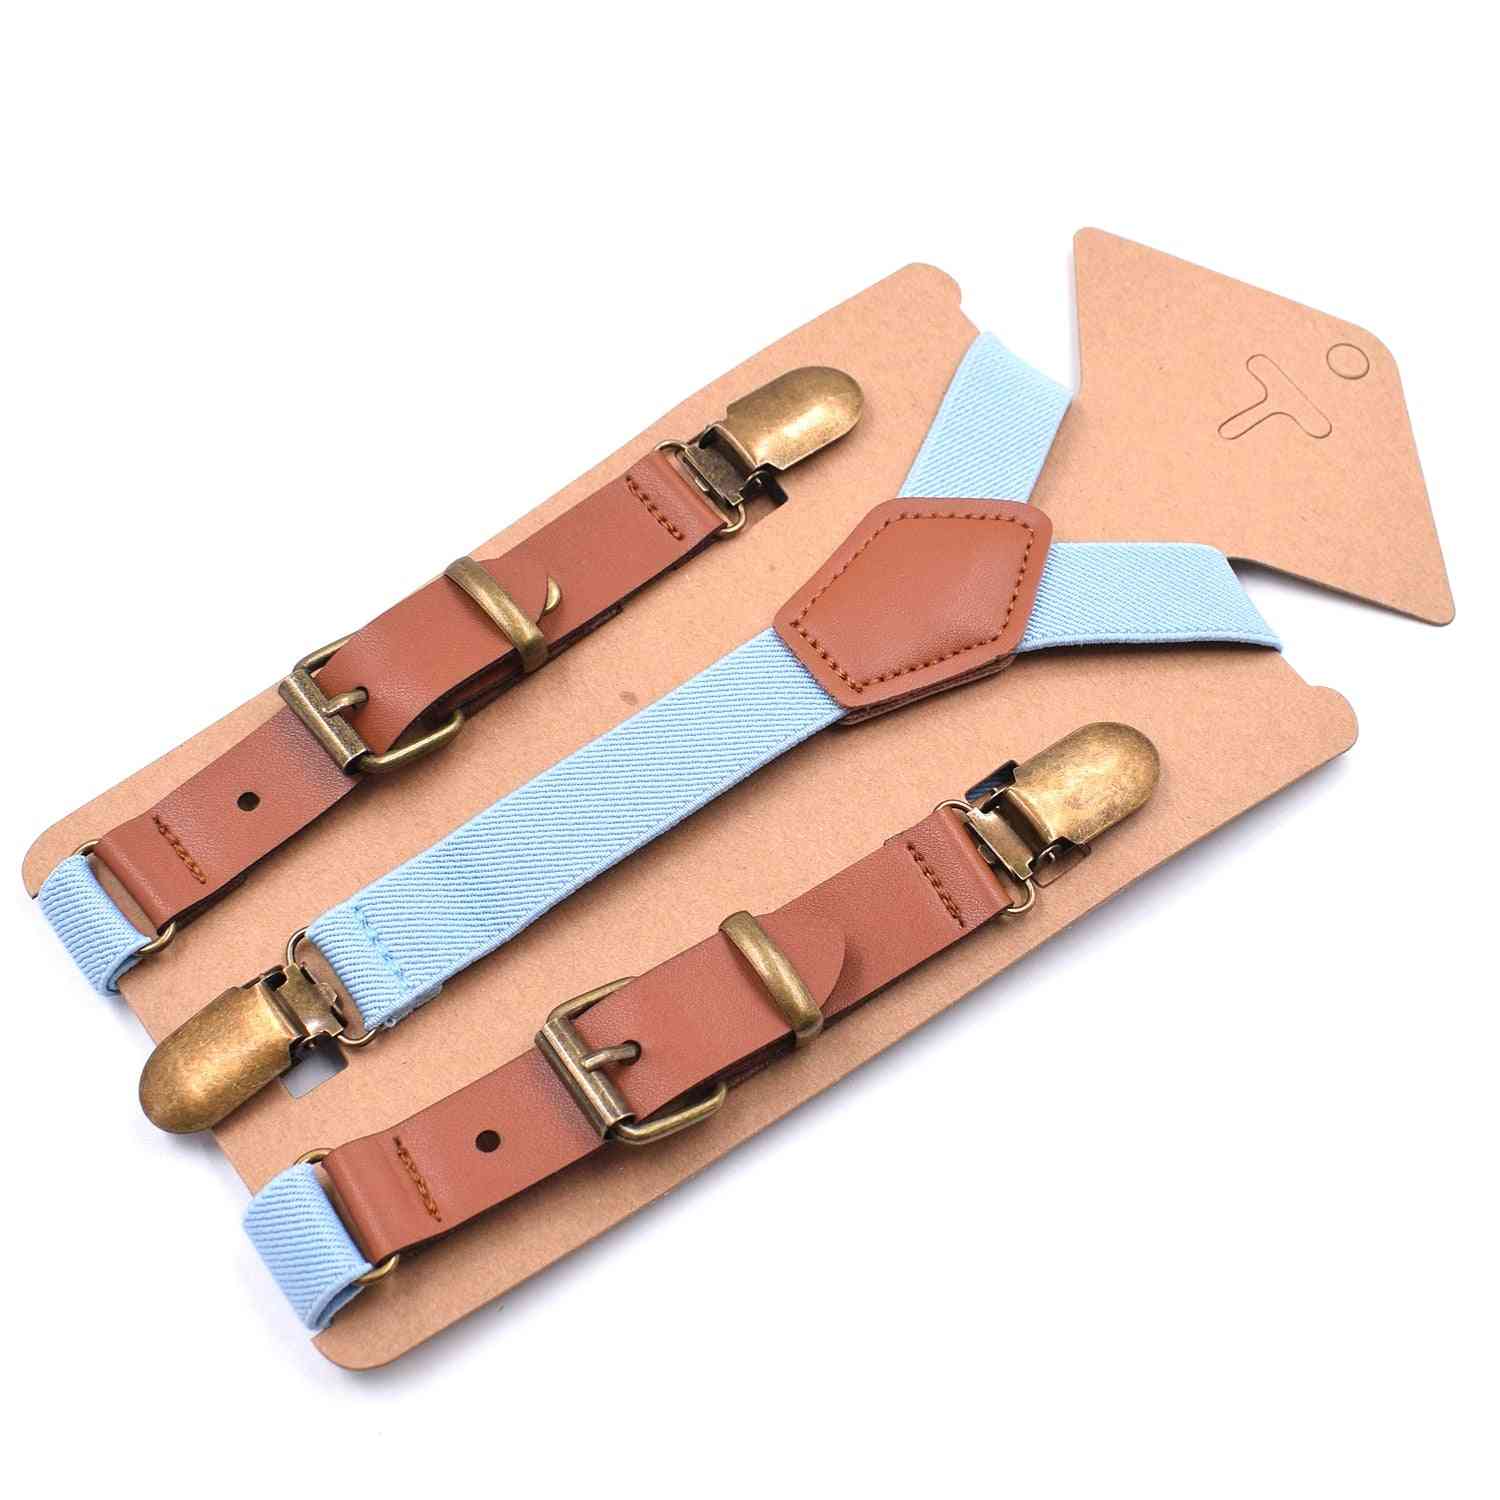 Fashion Adjustable Elastic With 3 Strong Metal Clips Y Back Suspenders